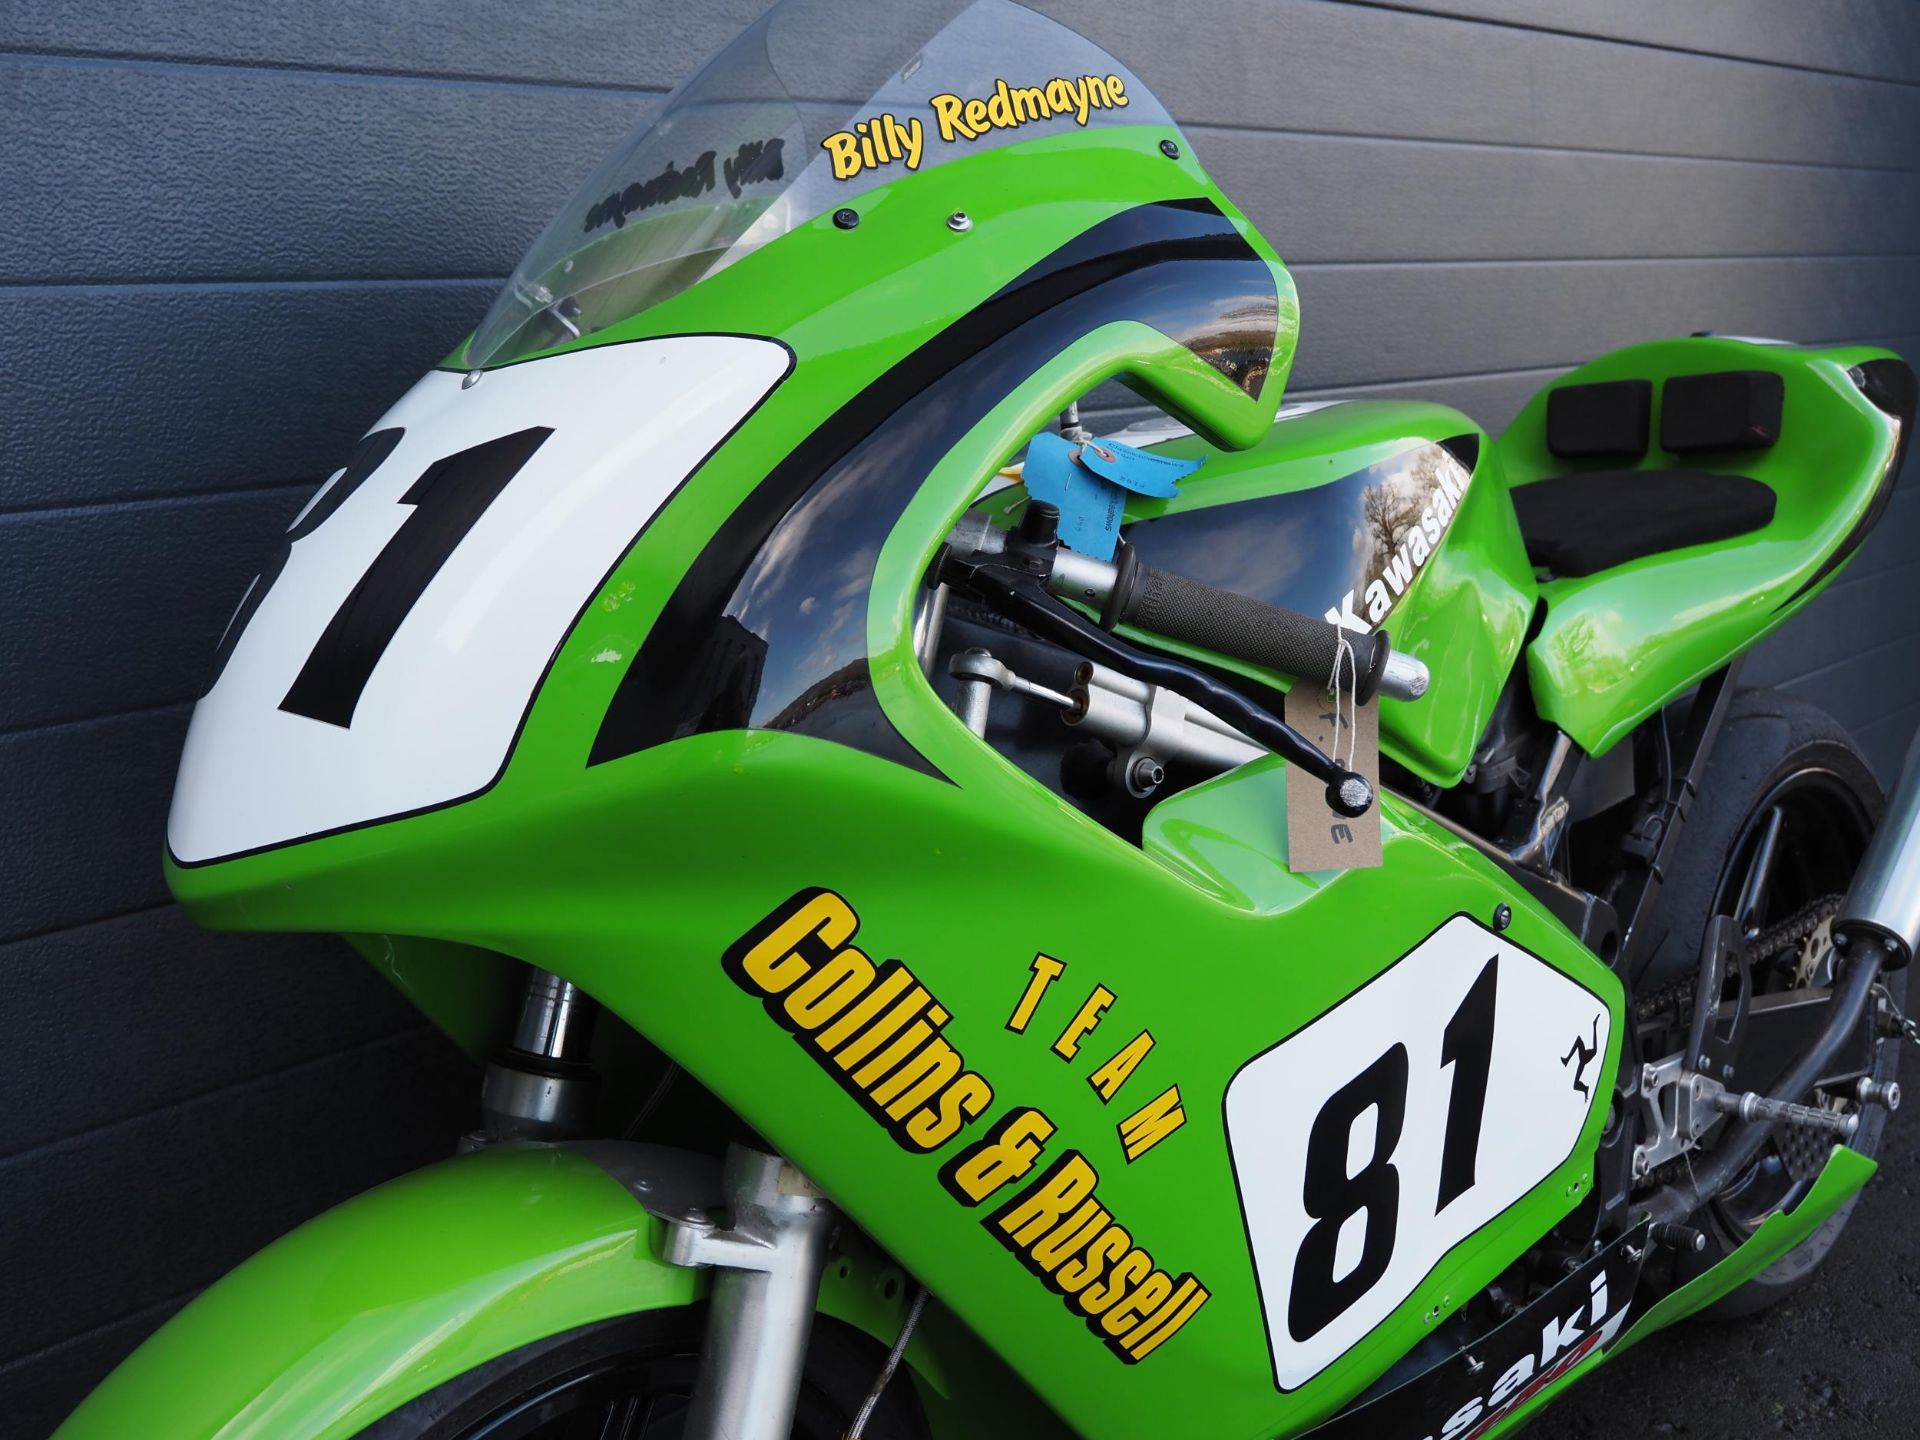 Kawasaki KR1-S 250 F2 motorcycle. 1992 This bike was ridden by Billy Redmayne at the 2015 Classic F2 - Image 8 of 8